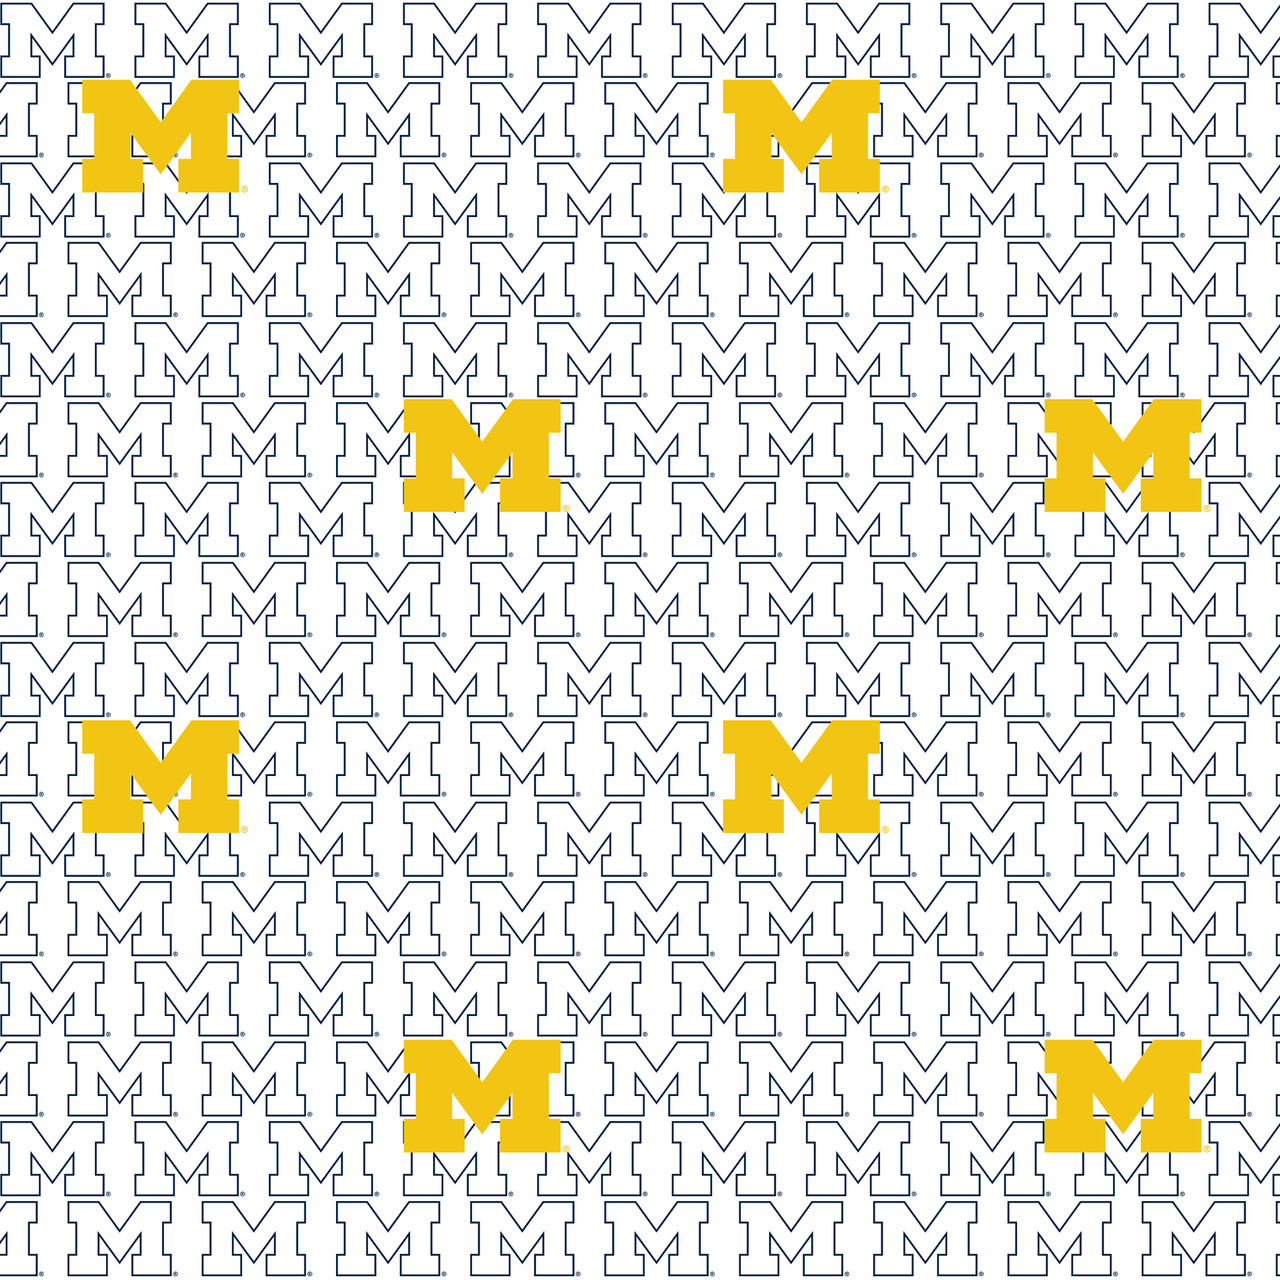 University of Michigan Wolverines Cotton Fabric with White Block Letter Print or Matching Solid Cotton Fabrics